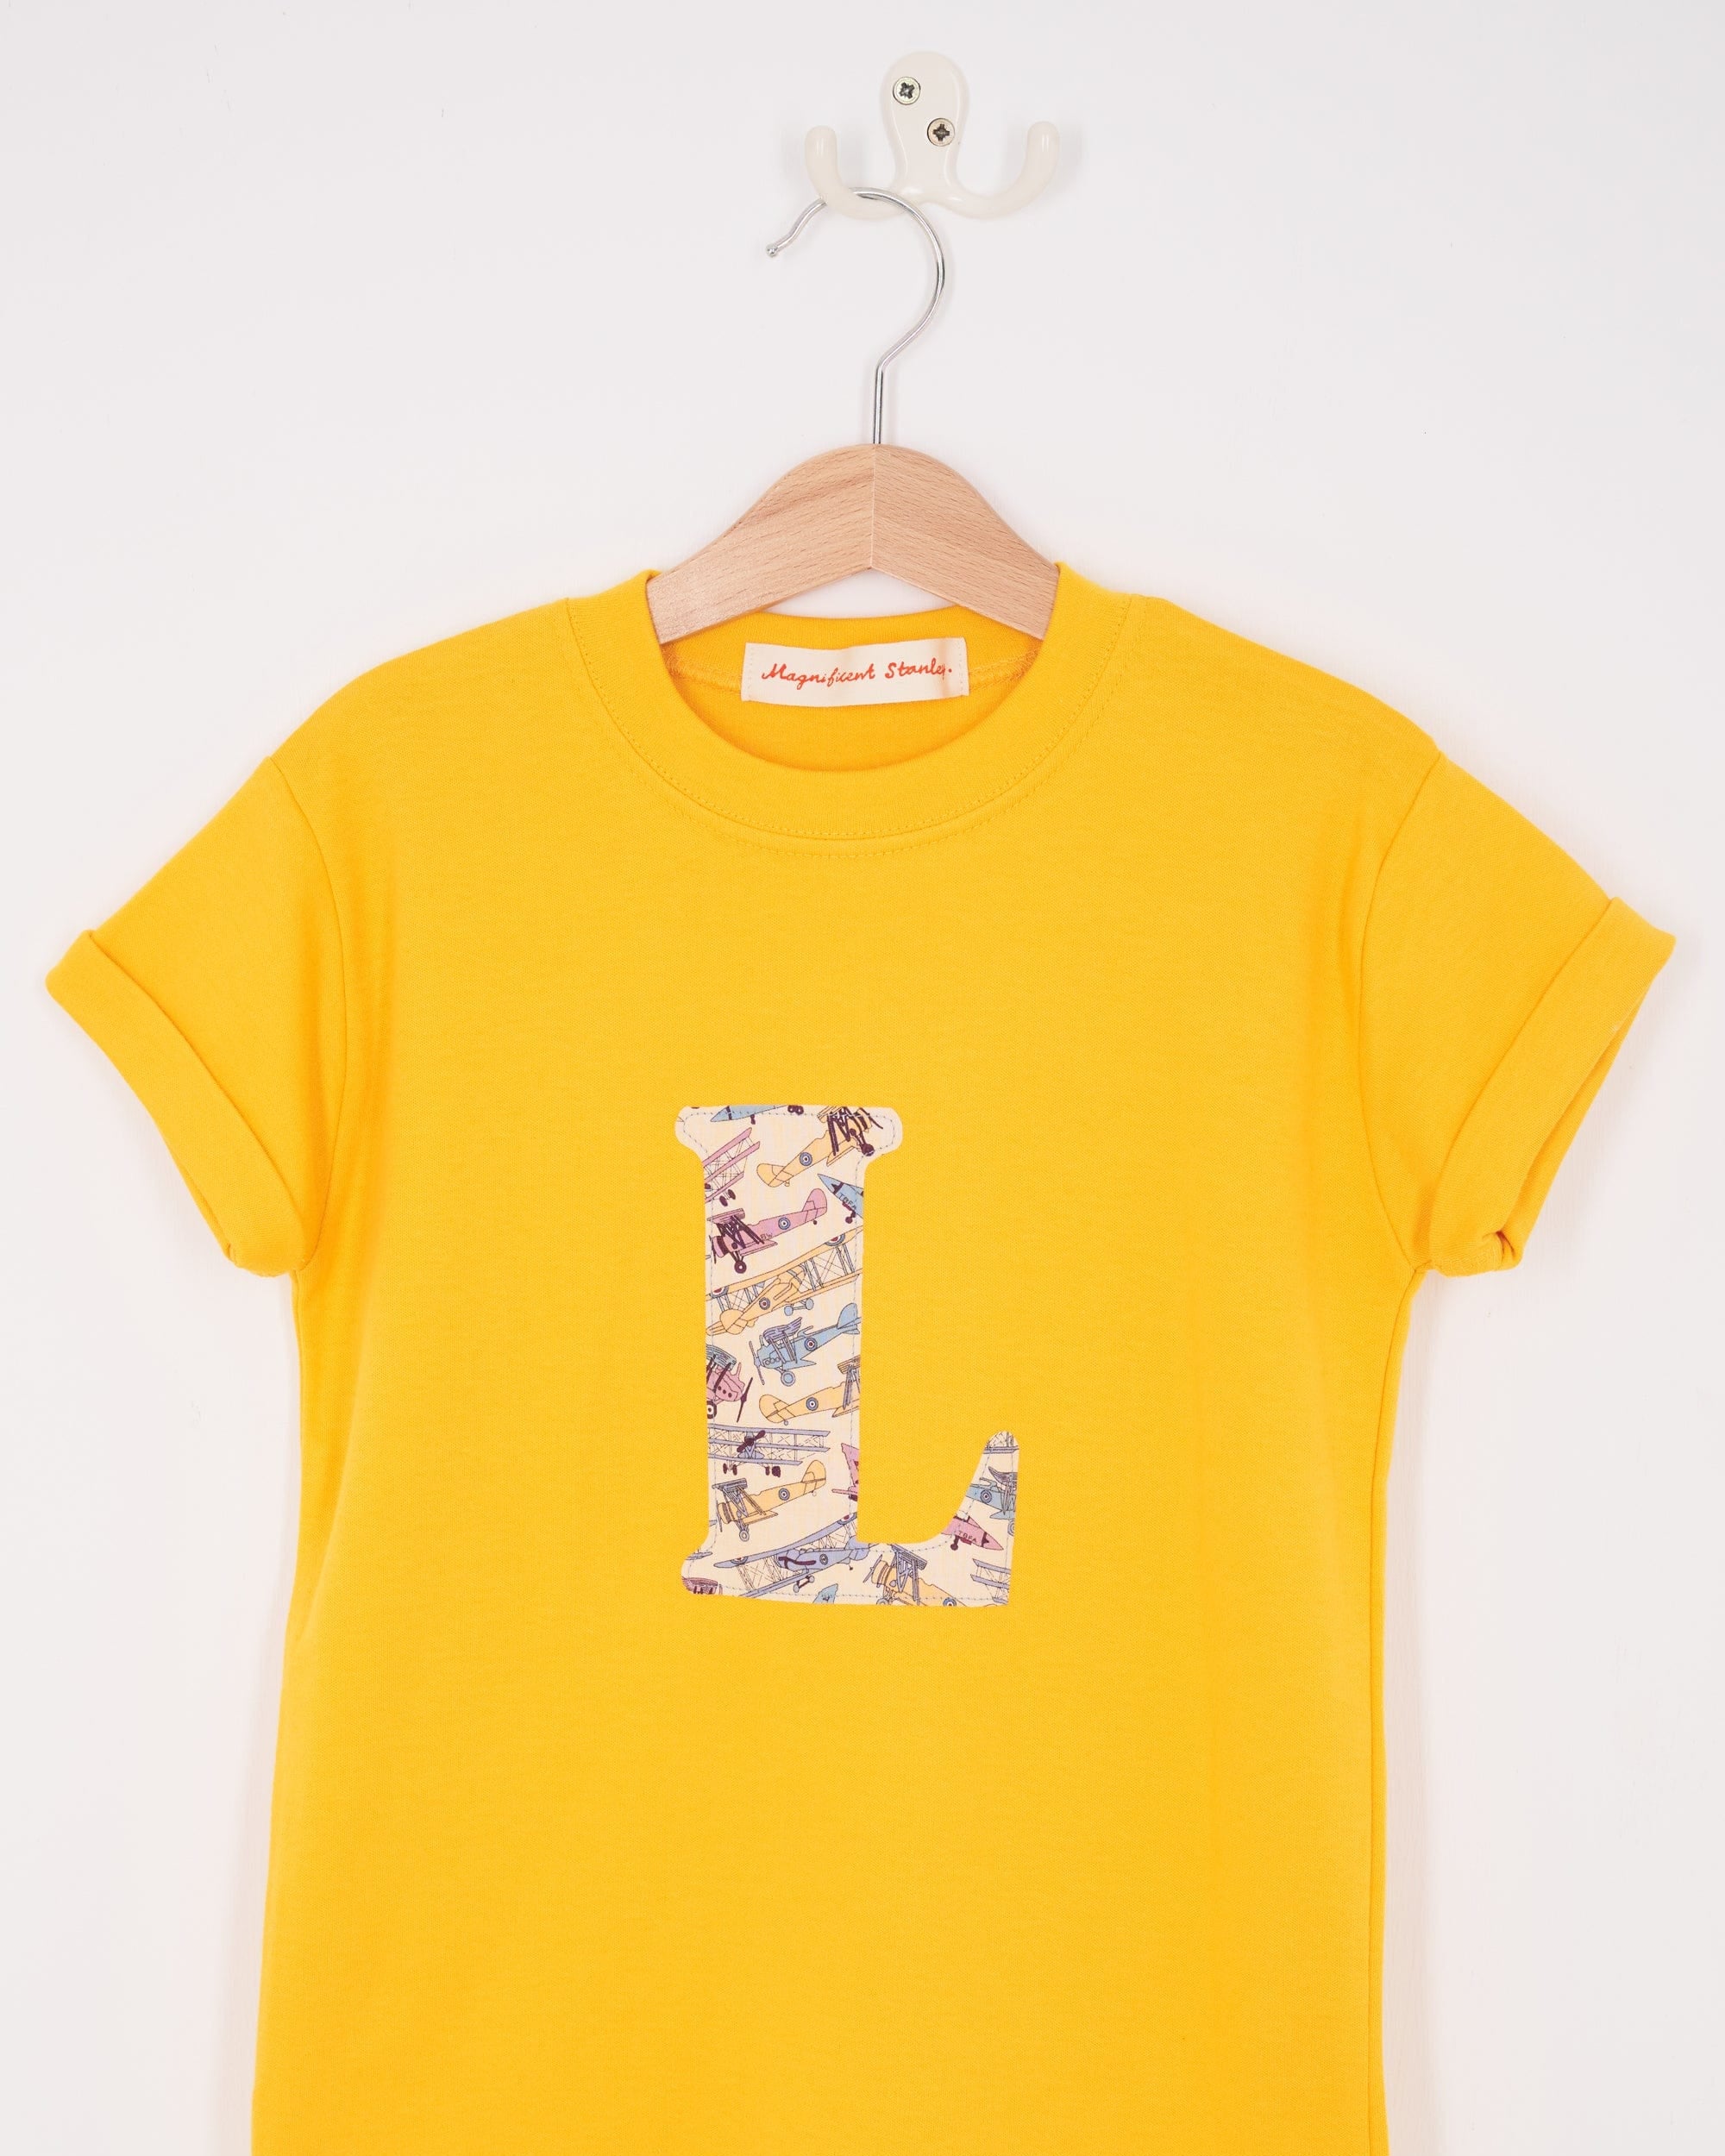 Magnificent Stanley Tee Personalised Yellow T-Shirt in Tom's Jet Liberty Print